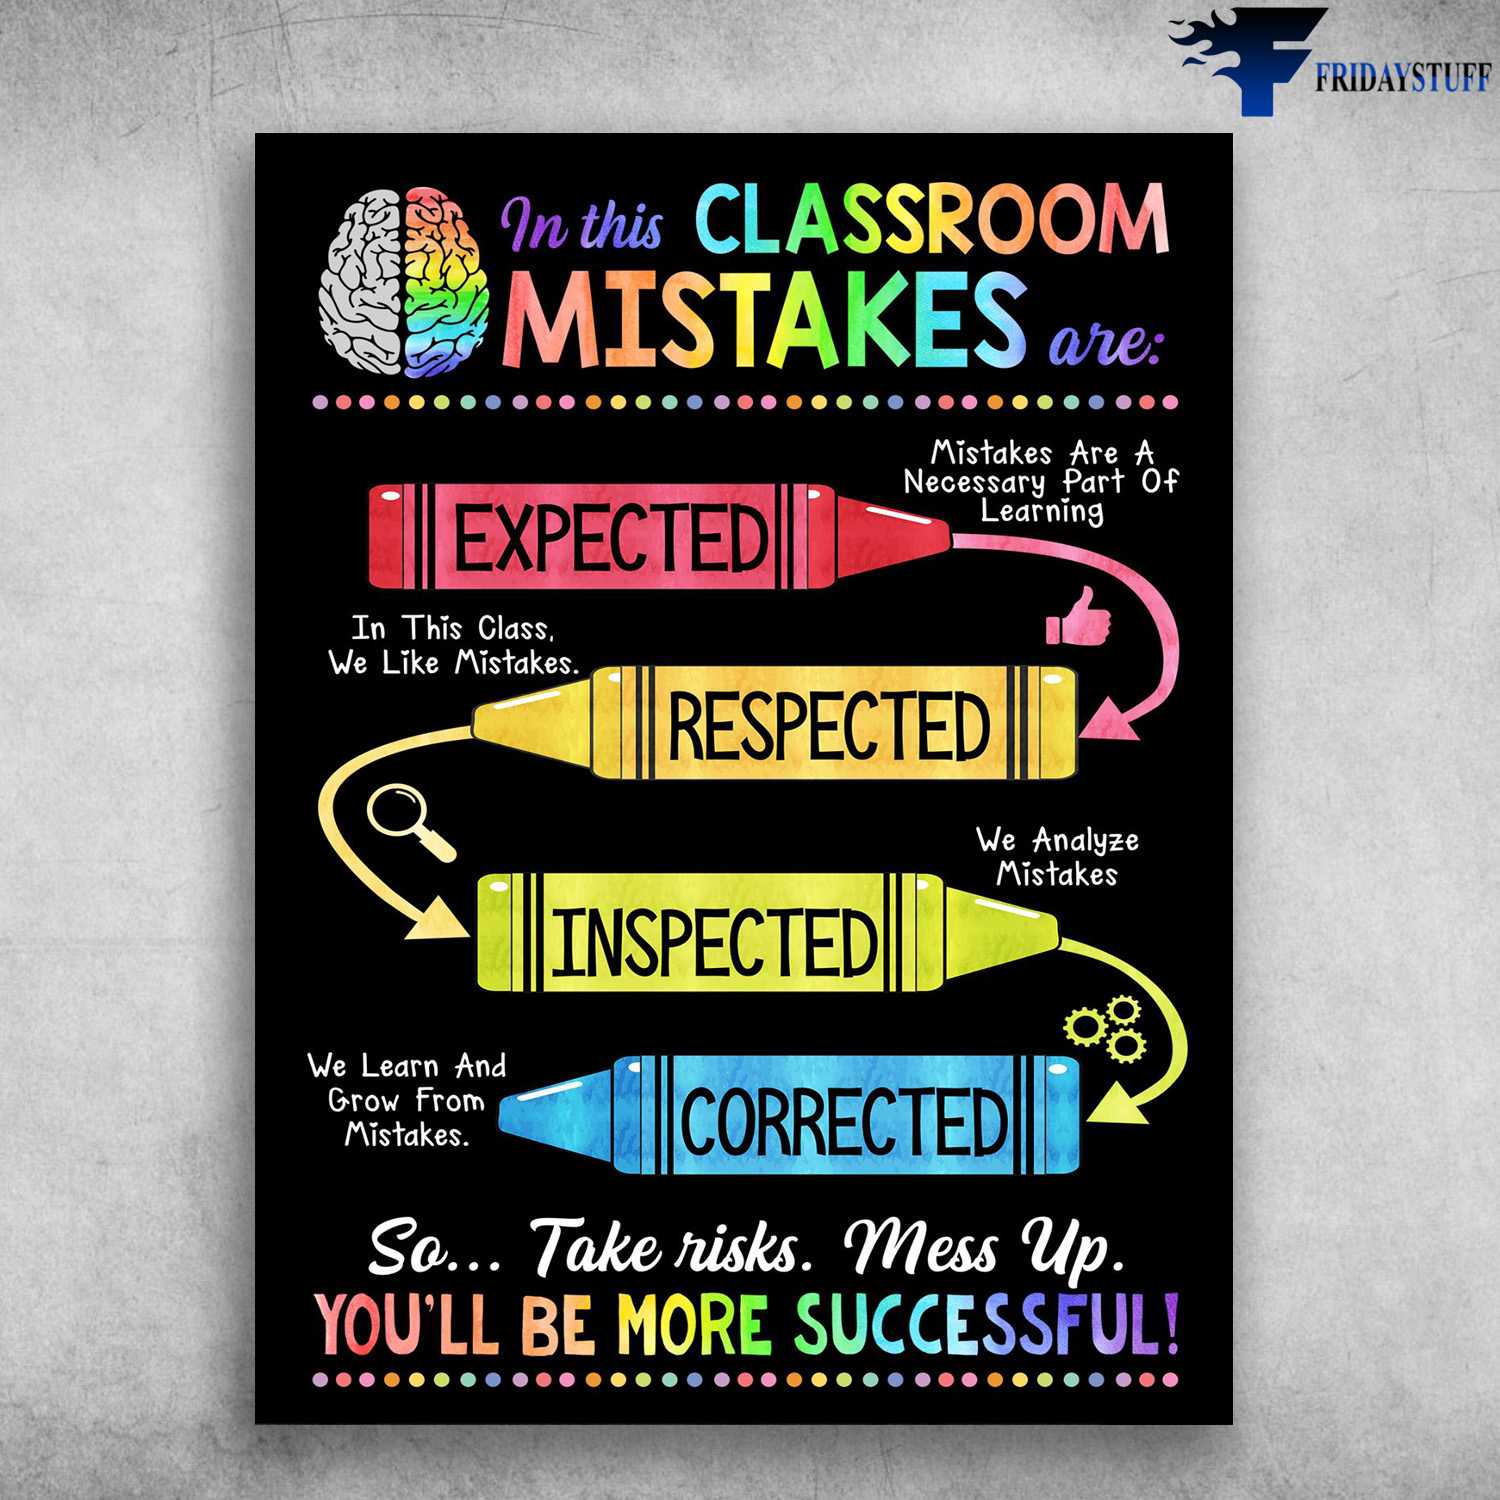 Classroom Poster - In This Classroom, Mistakes Are A Necessary Part Of Learning, We Like Mistake, We Analyze Mistakes, We Learn And Grow From Mistakes